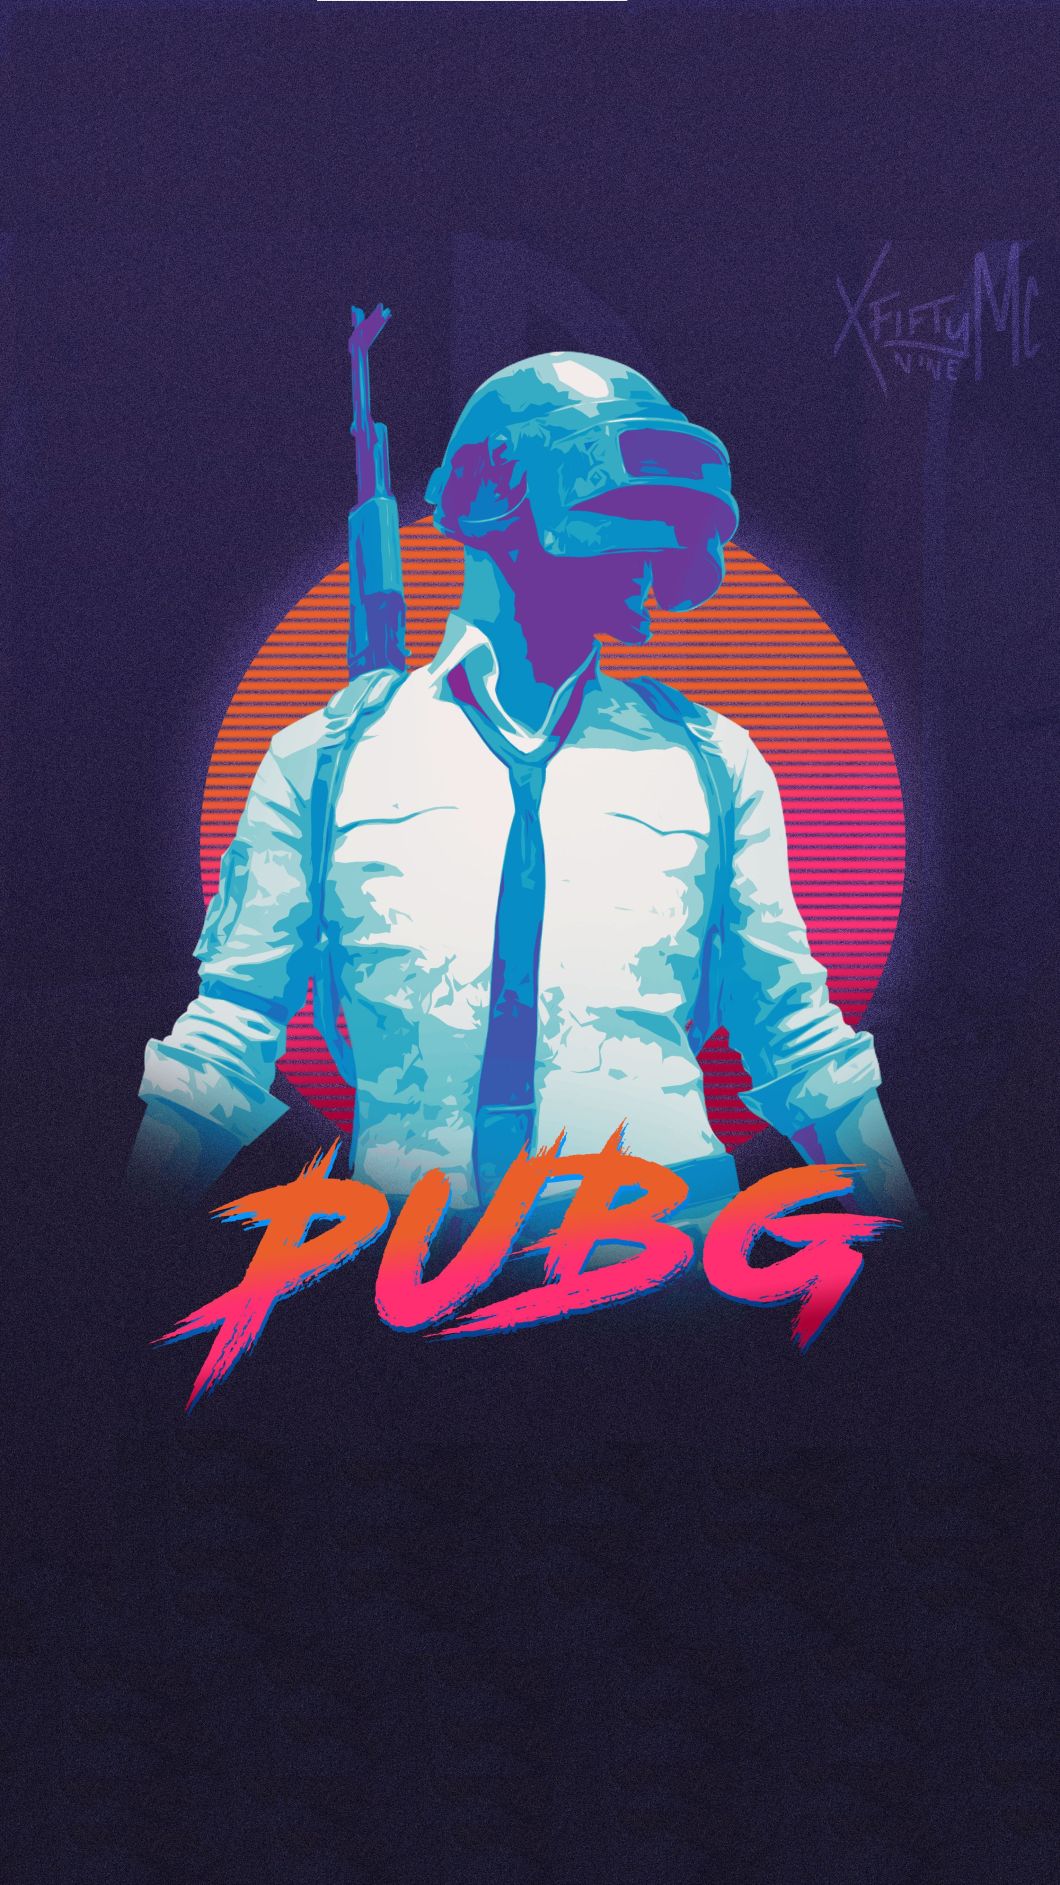 17 PUBG Mobile HD Wallpapers For iPhone Android   Page 3 of 4 1060x1885